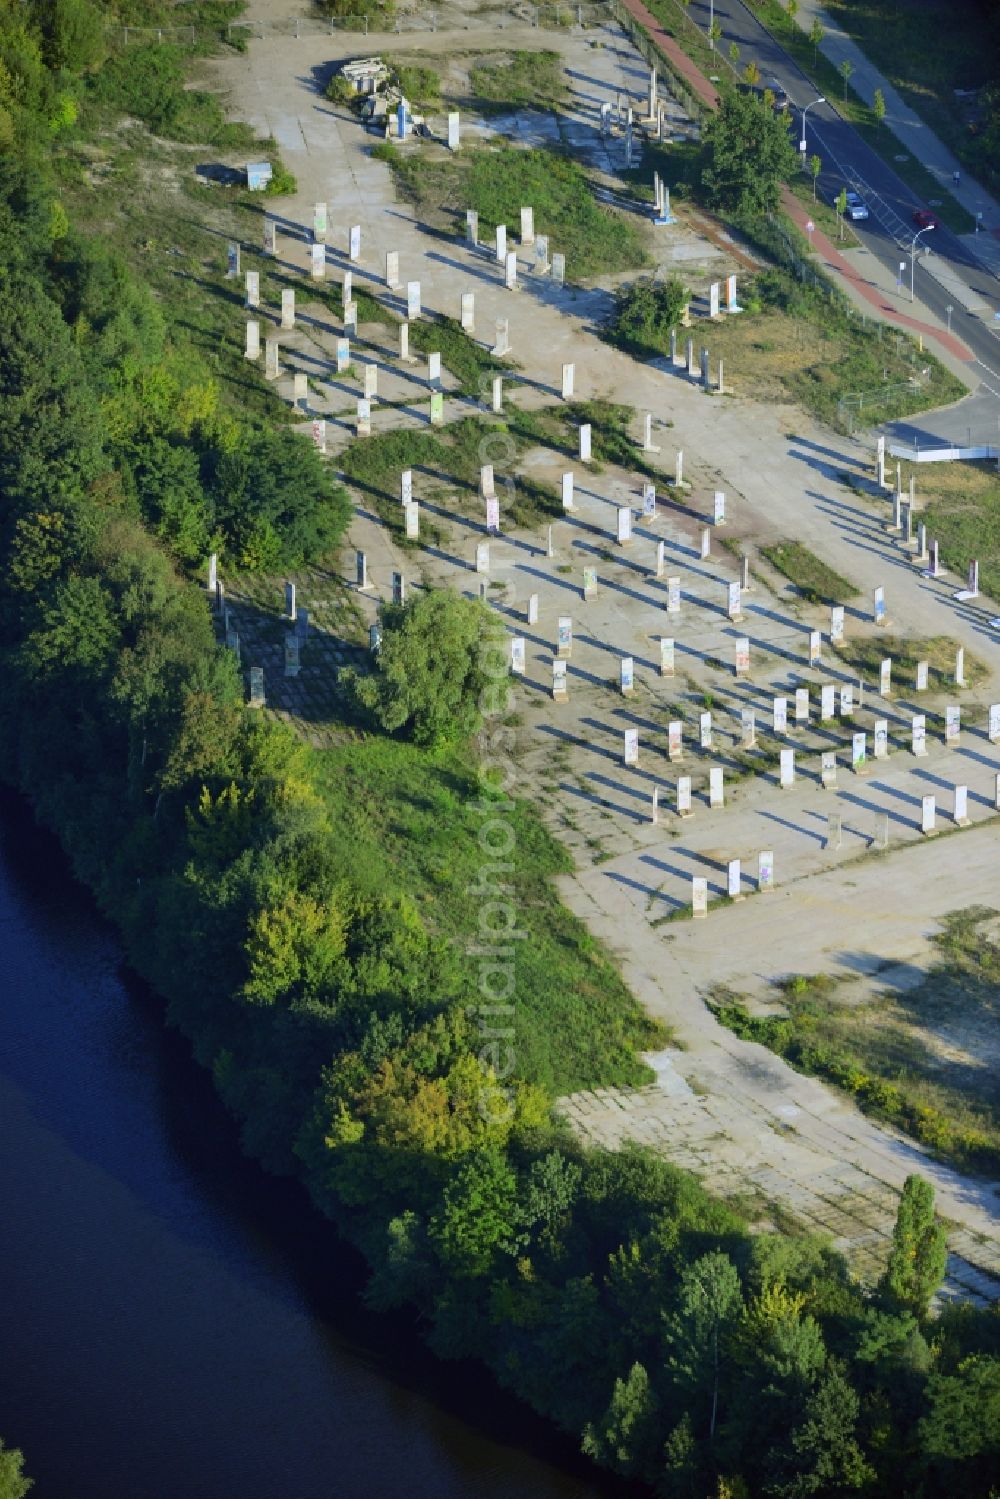 Teltow from above - Gallery of Concrete - segments of the Berlin Wall on business premises in Teltow, Brandenburg